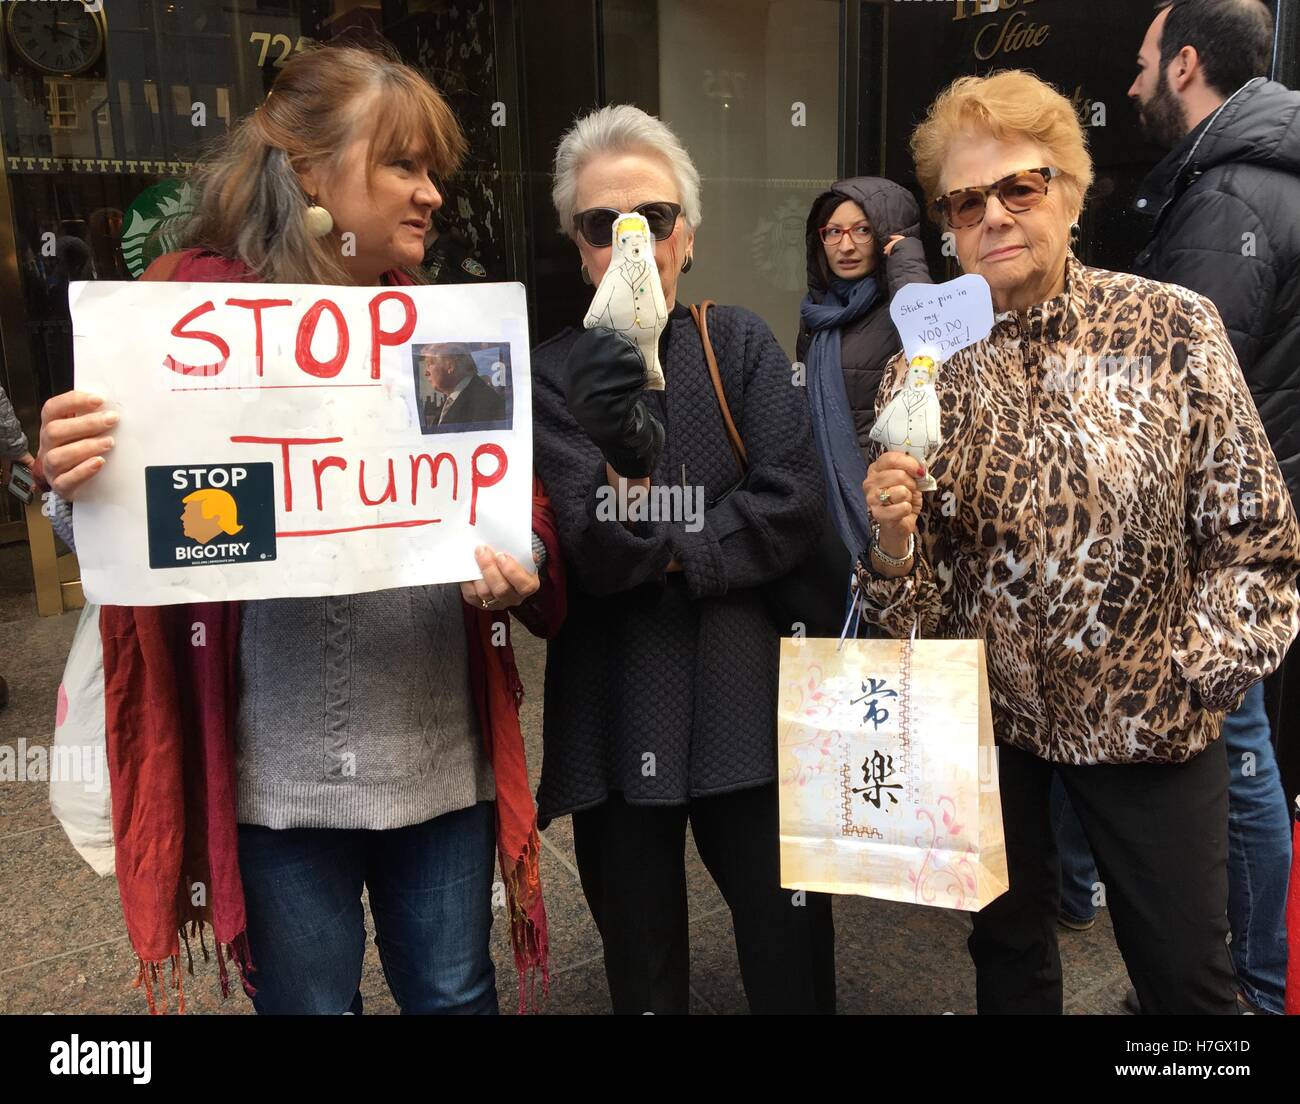 New York, NY, USA. 4th Nov, 2016. Anti-Trump protestor and women holding Donald Trump voodoo dolls protest outside of Trump Tower in New York, New York on November 2, 2016. © Rainmaker Photo/Media Punch/Alamy Live News Stock Photo